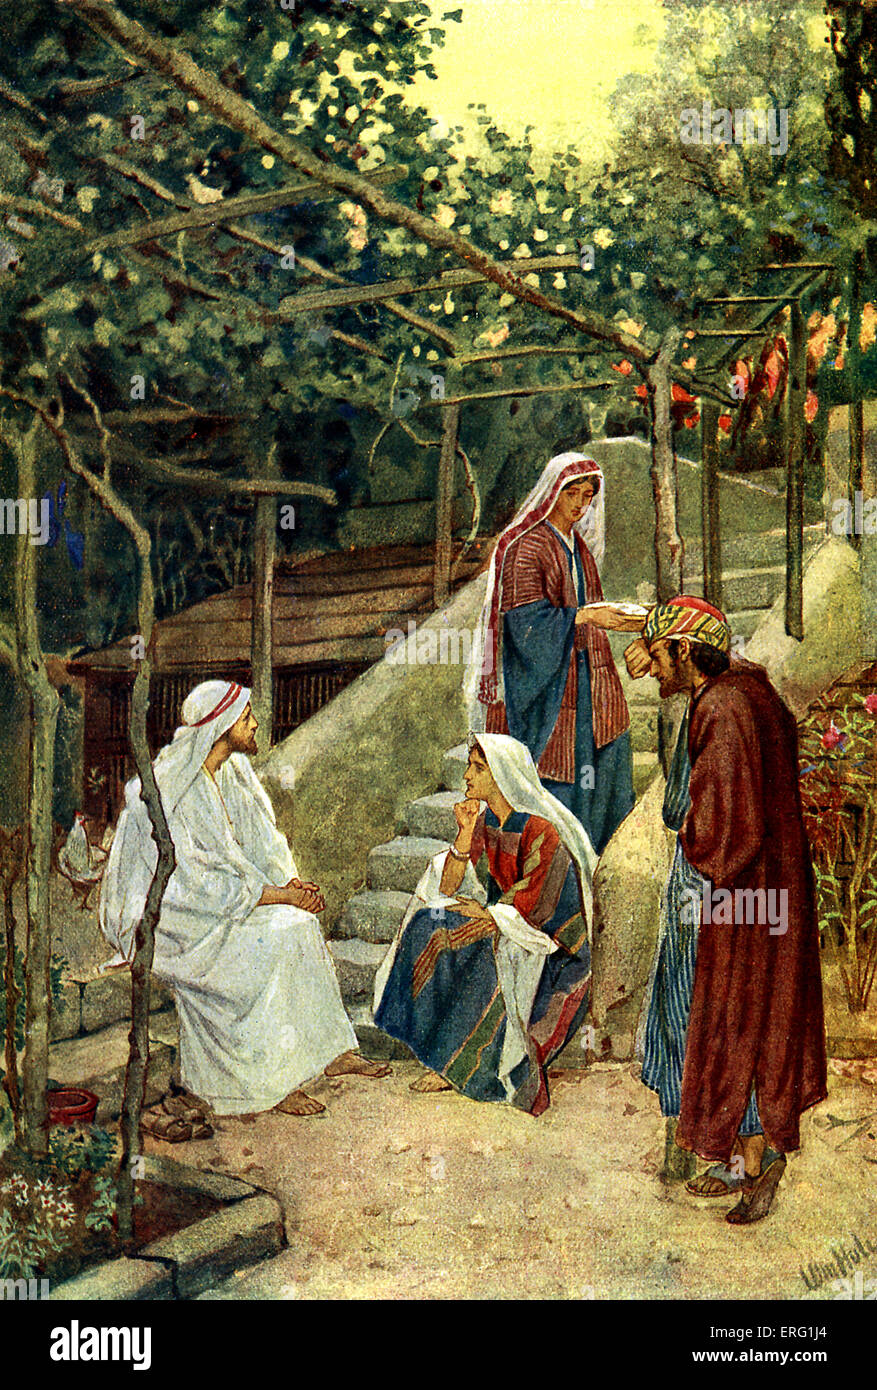 Jesus in the home of Martha. Martha is concerned that Mary sits and listens to their guest rather than serving. 'Martha, Martha, thou art careful and troubled about many things: But one thing is needful: and Mary hath chosen that good part, which shall not be taken away from her' Luke x 38-42. Illustration by William Hole 1846-1917. Stock Photo